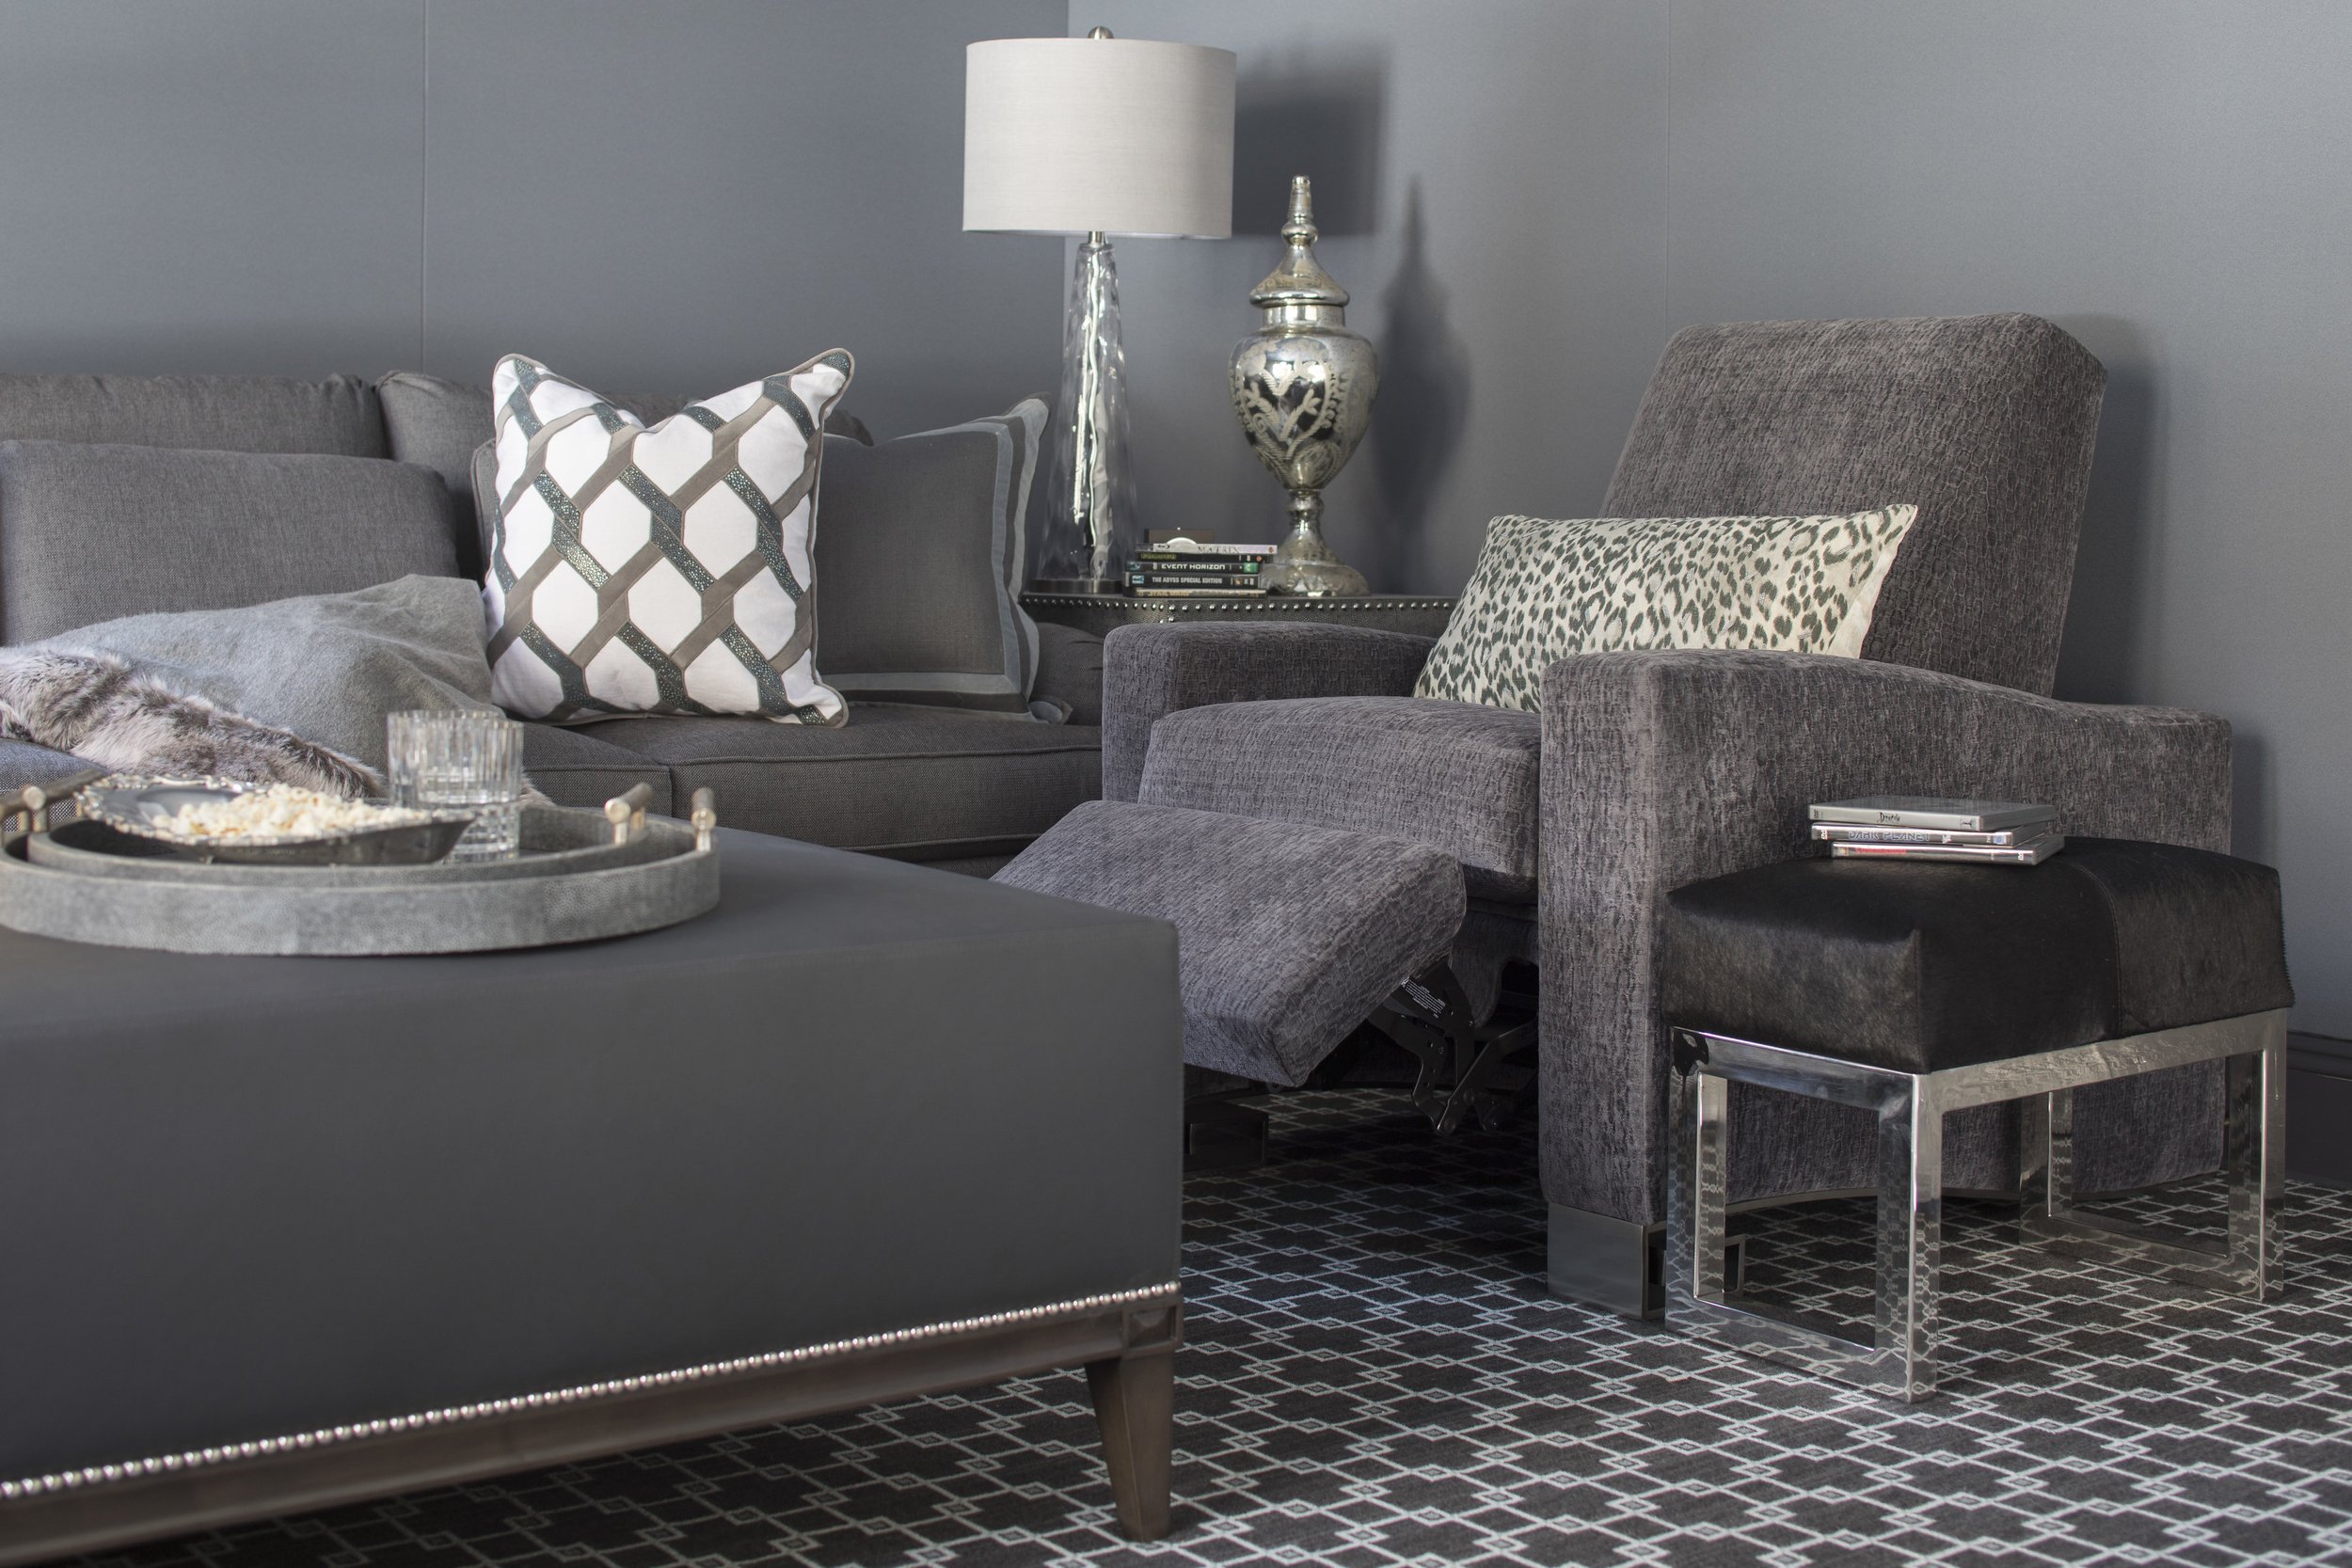 71-gray-sitting-area-chic-pattern-texture-rinfret-neoclassical-greenwich-connecticut.JPG